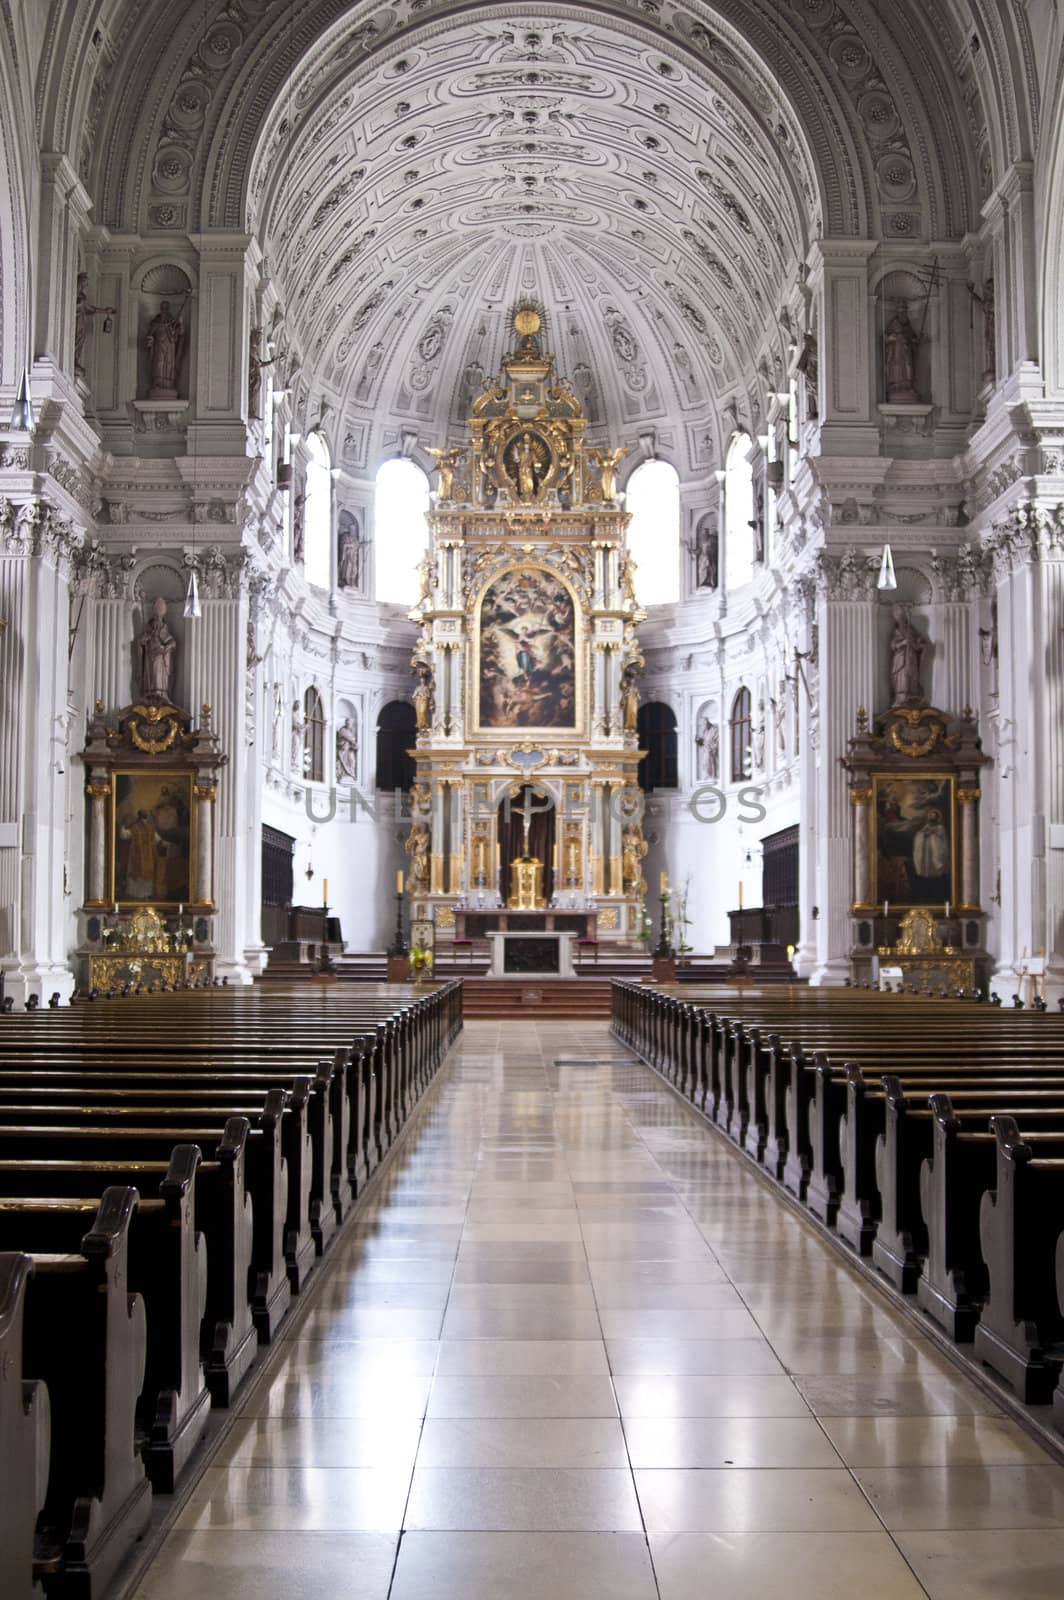 A large European cathedral interior with pews